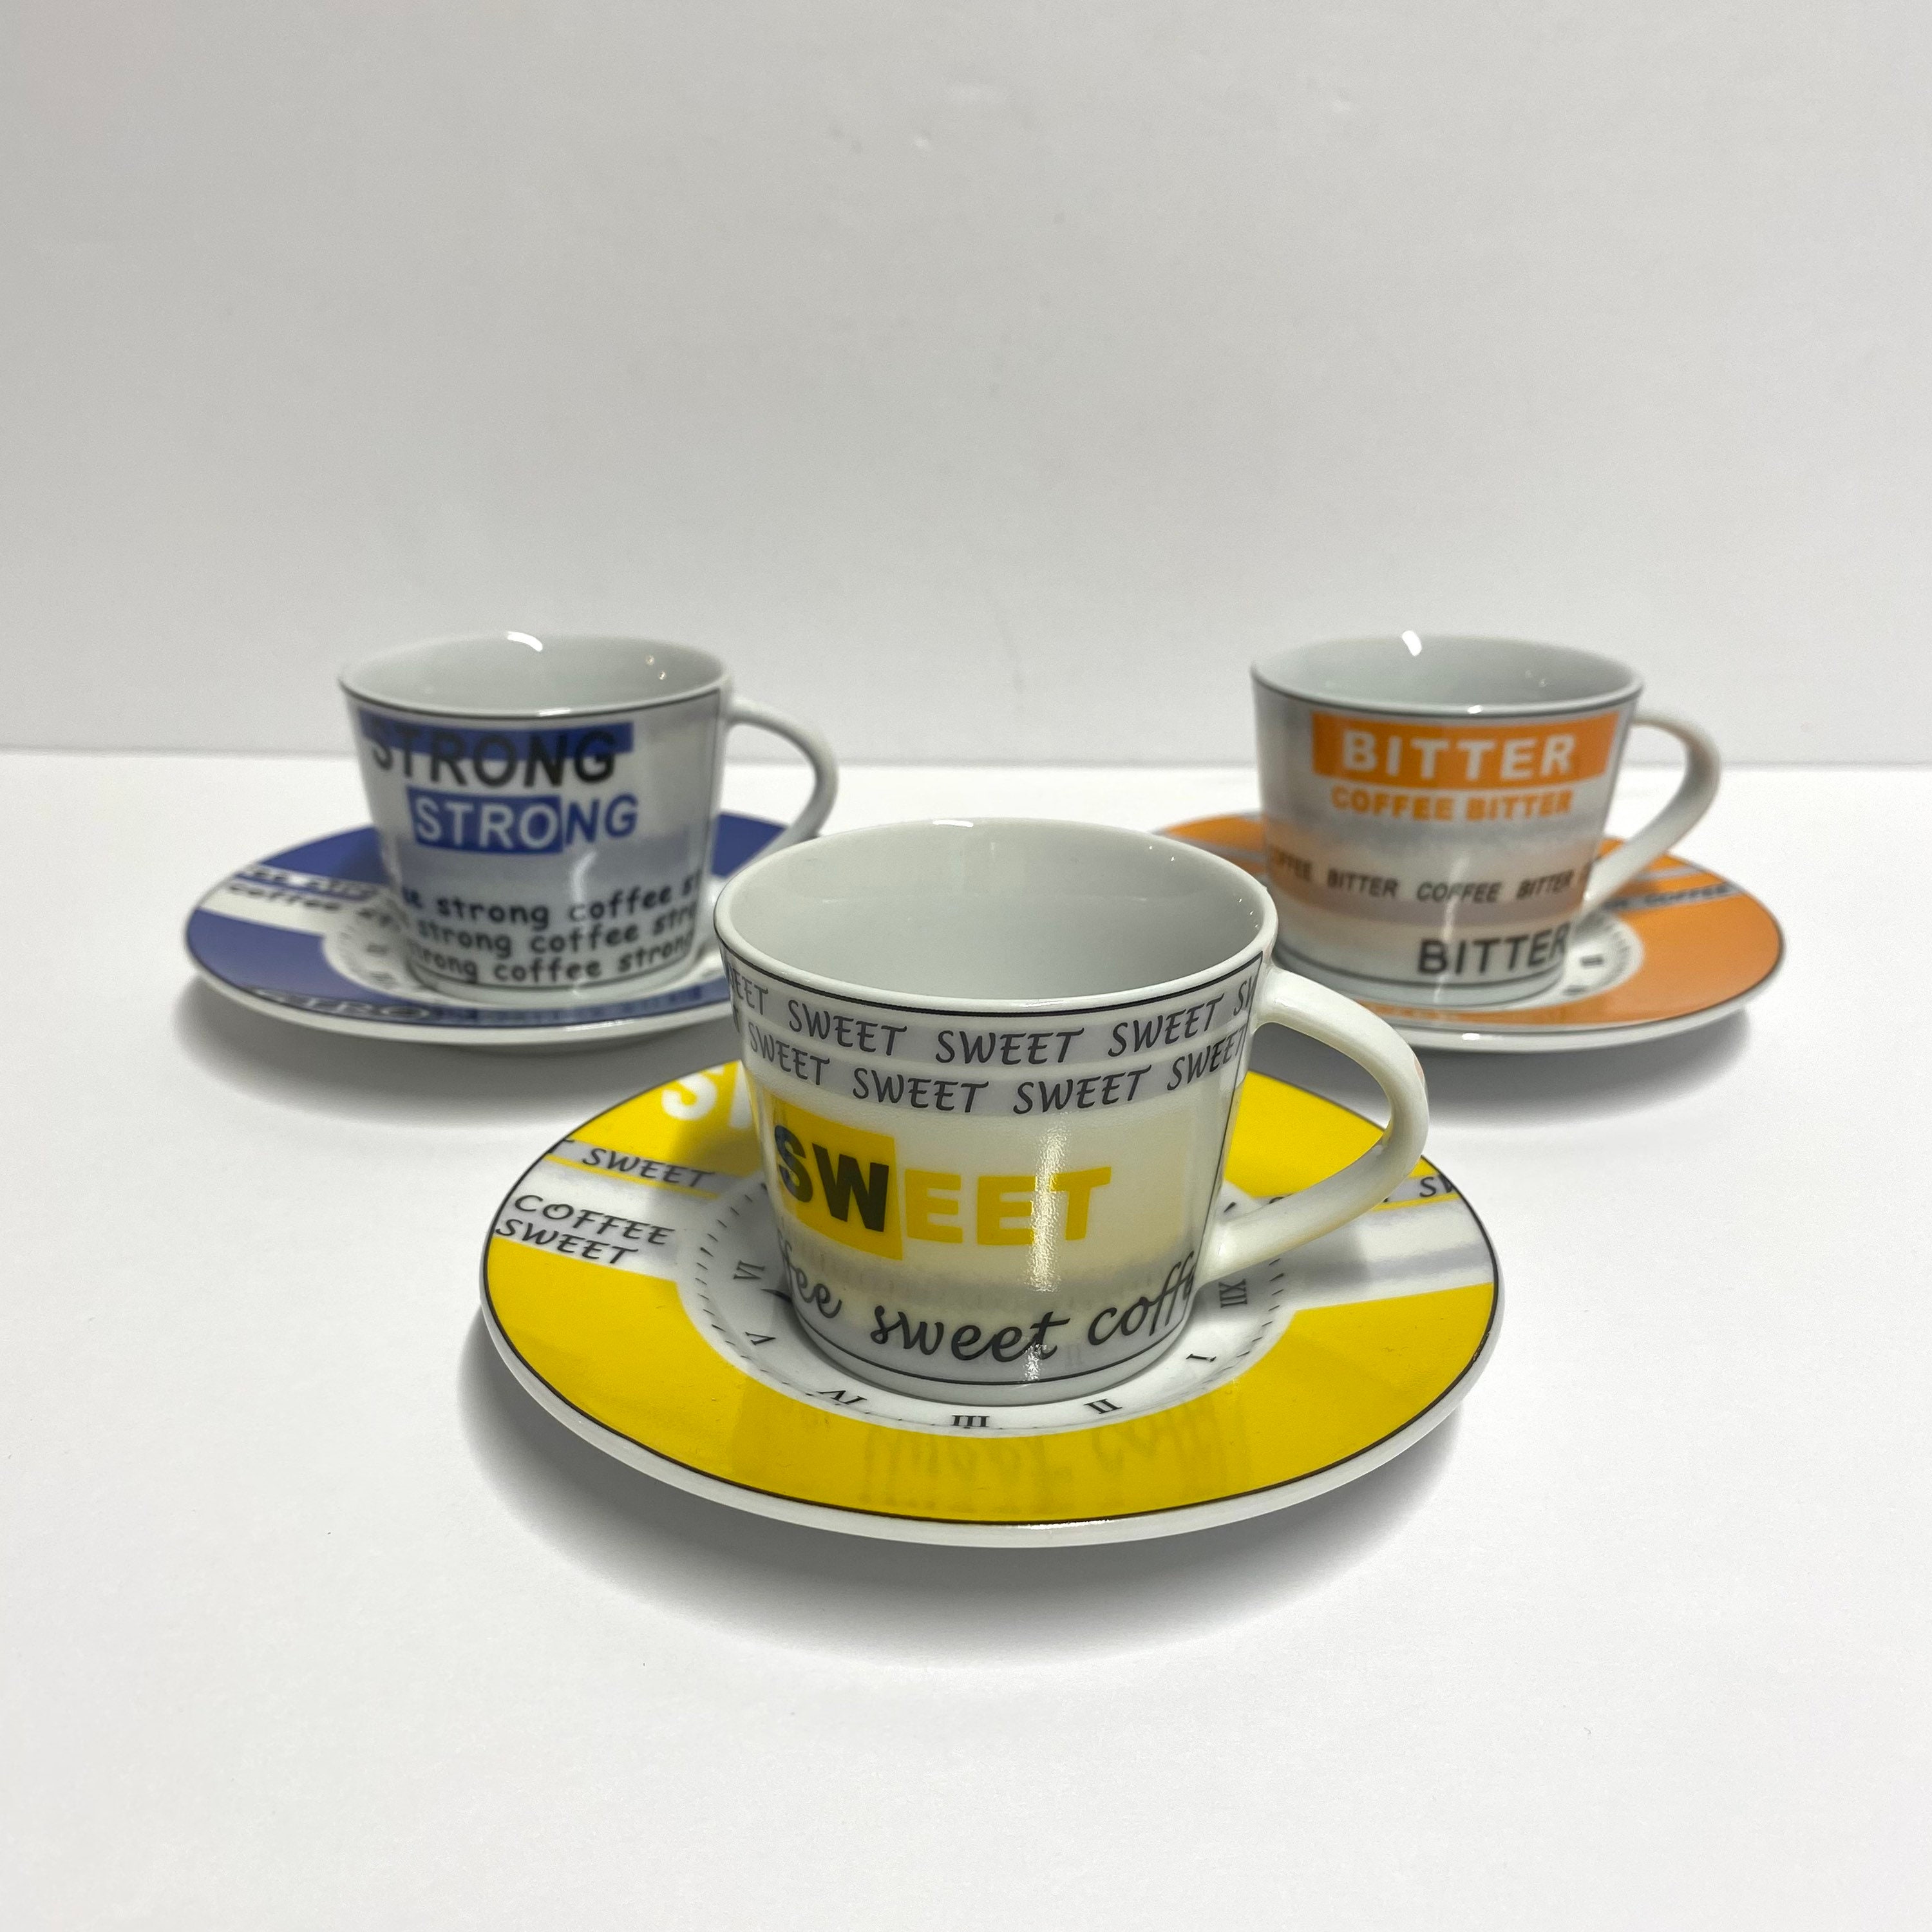 Sold at Auction: (12 Pc) Italian Tognana Espresso Cups & Saucers Set